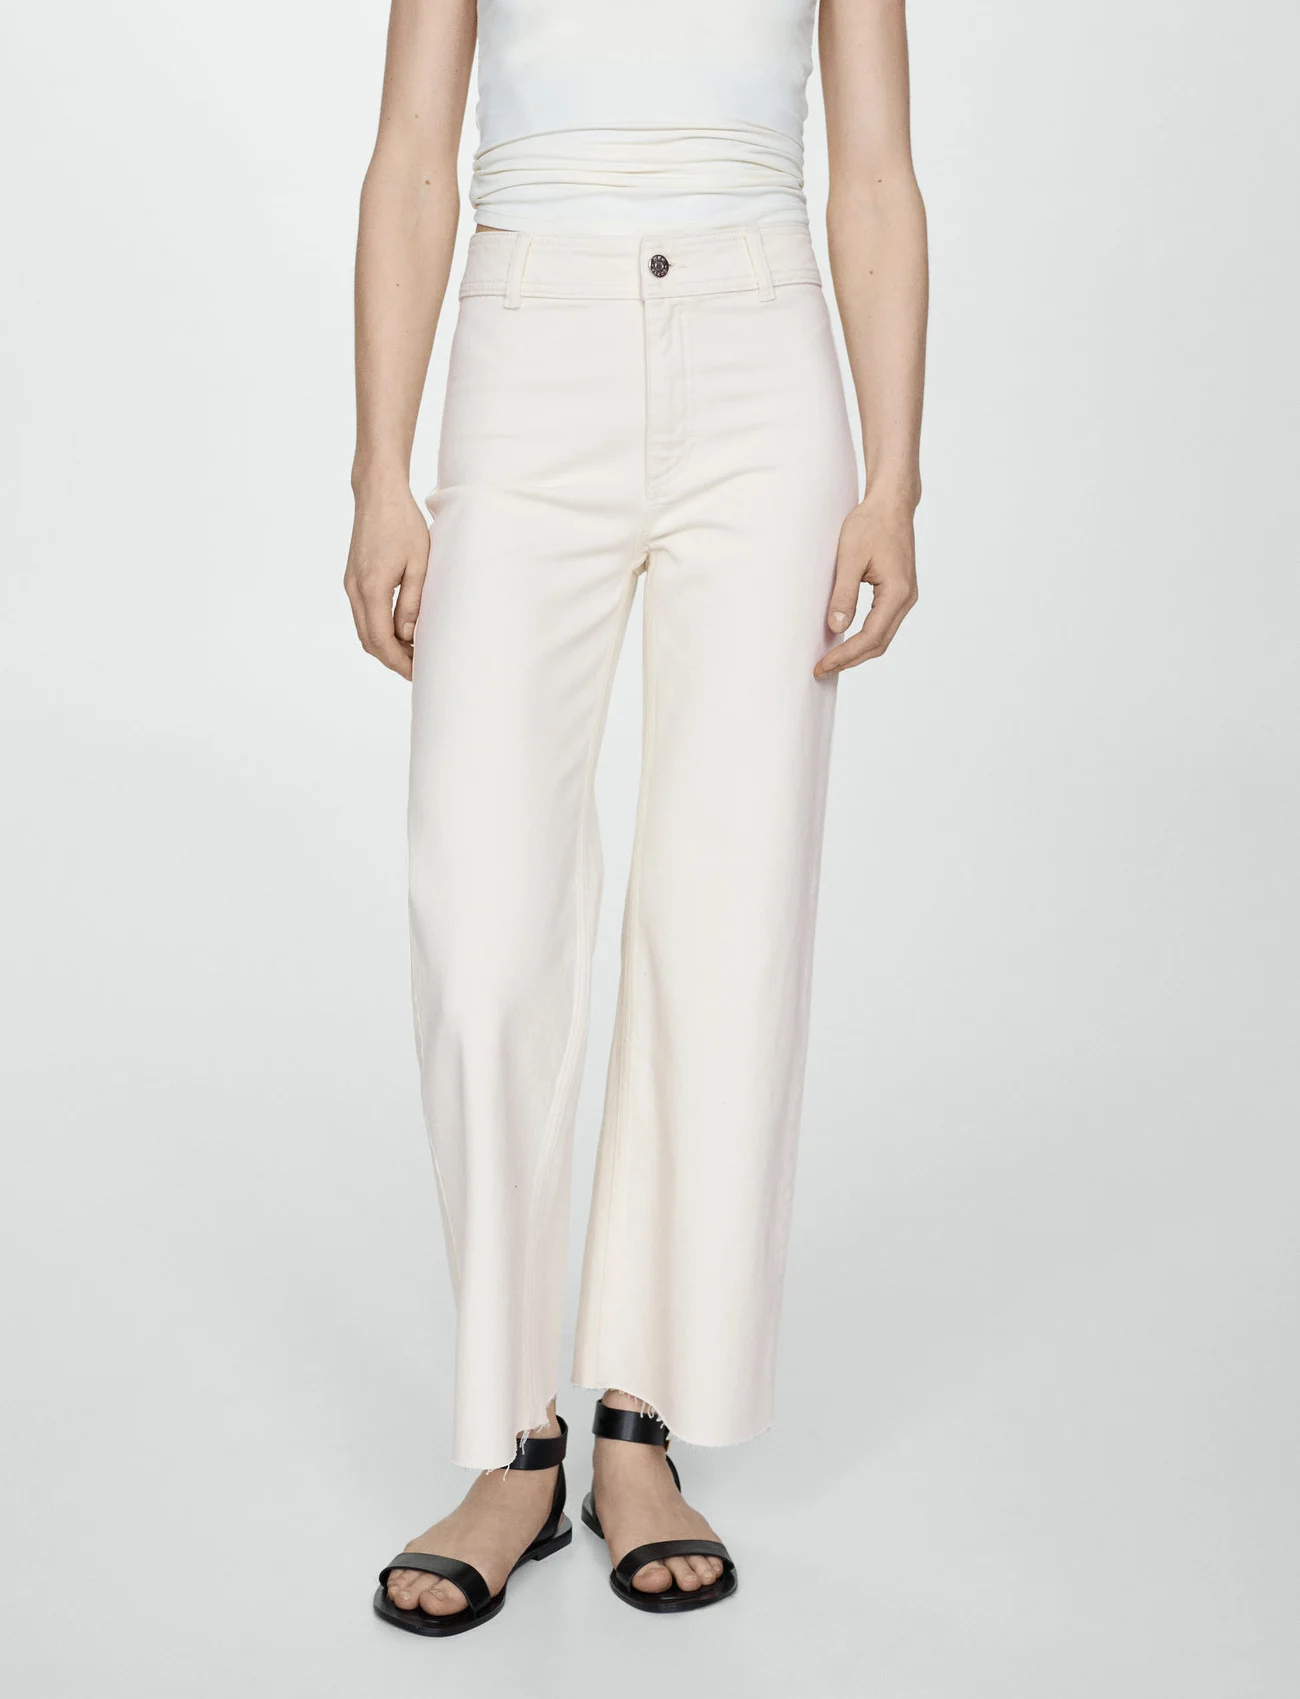 Mango - Jeans culotte high waist - flared jeans - natural white - 0